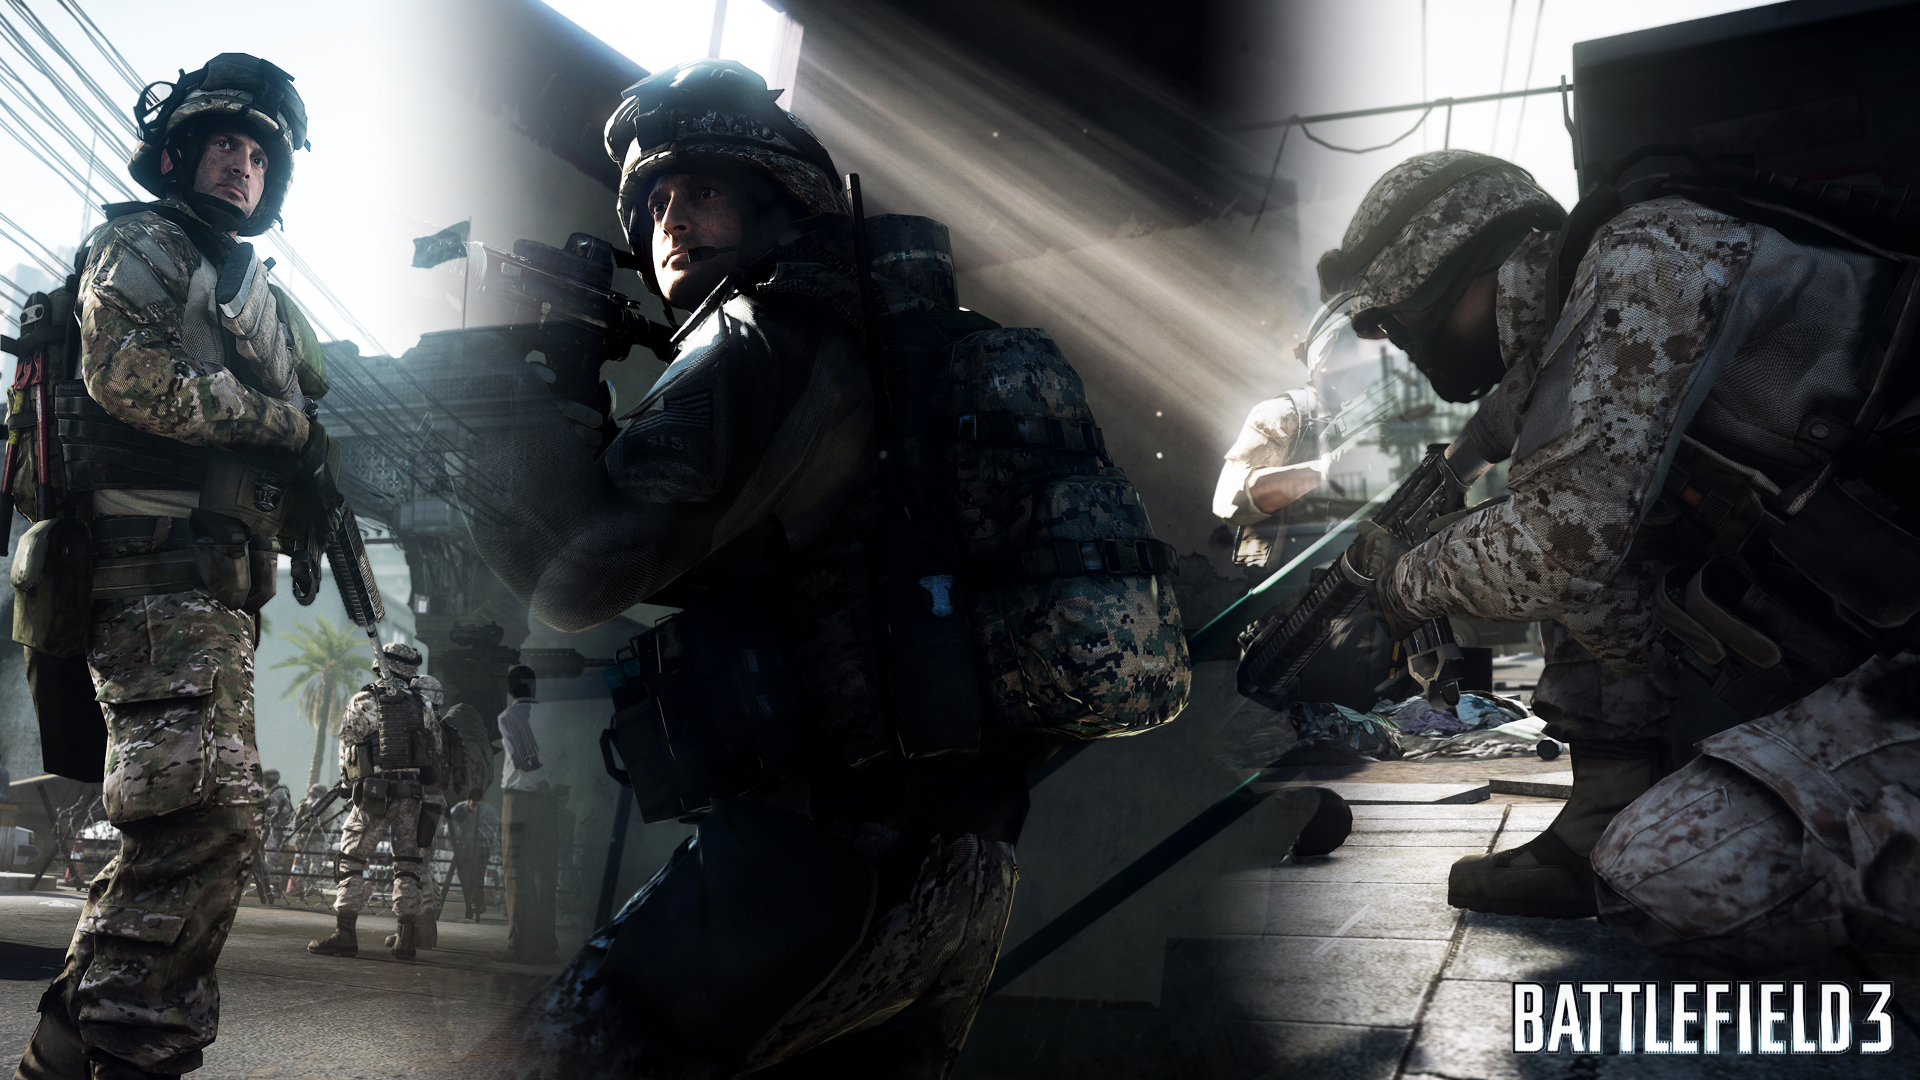 Battlefield 3 Wallpapers in HD High Resolution Page 4